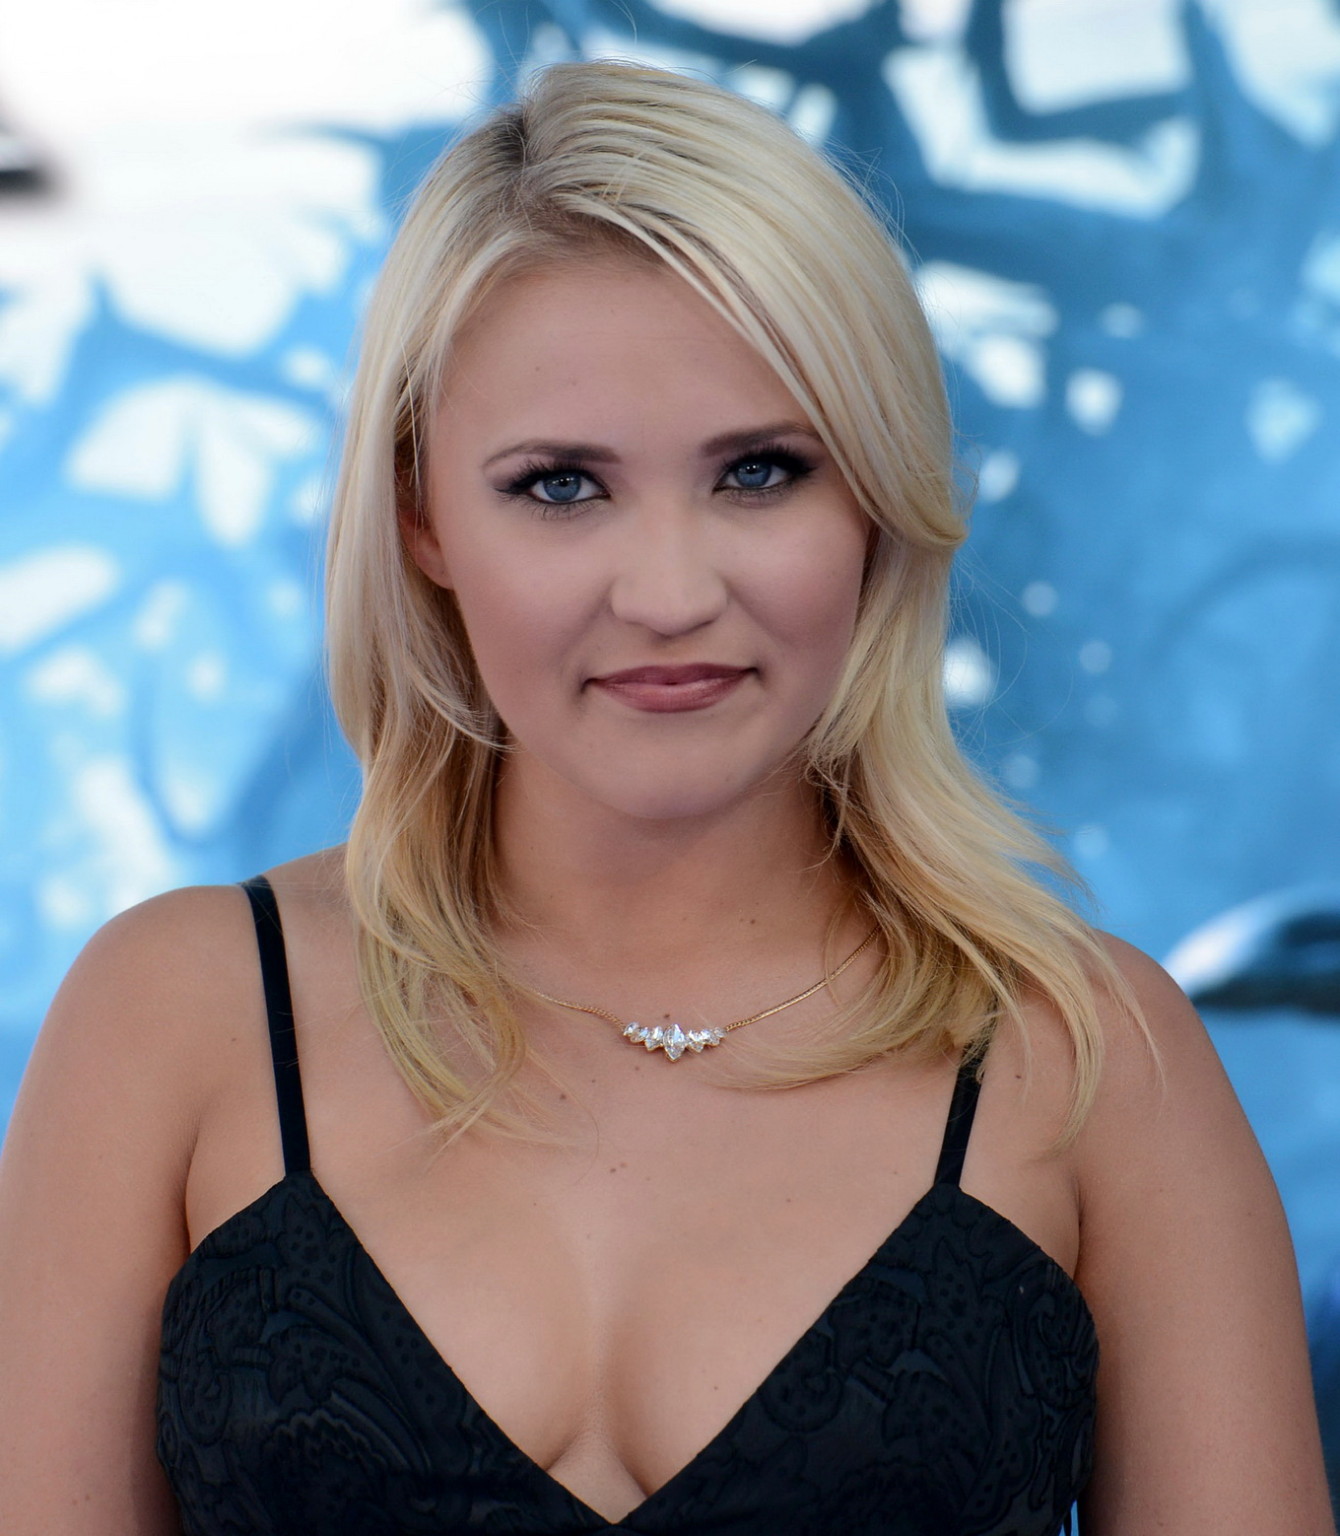 Busty Emily Osment wearing a low cut black dress at the Maleficent premiere in H #75195331